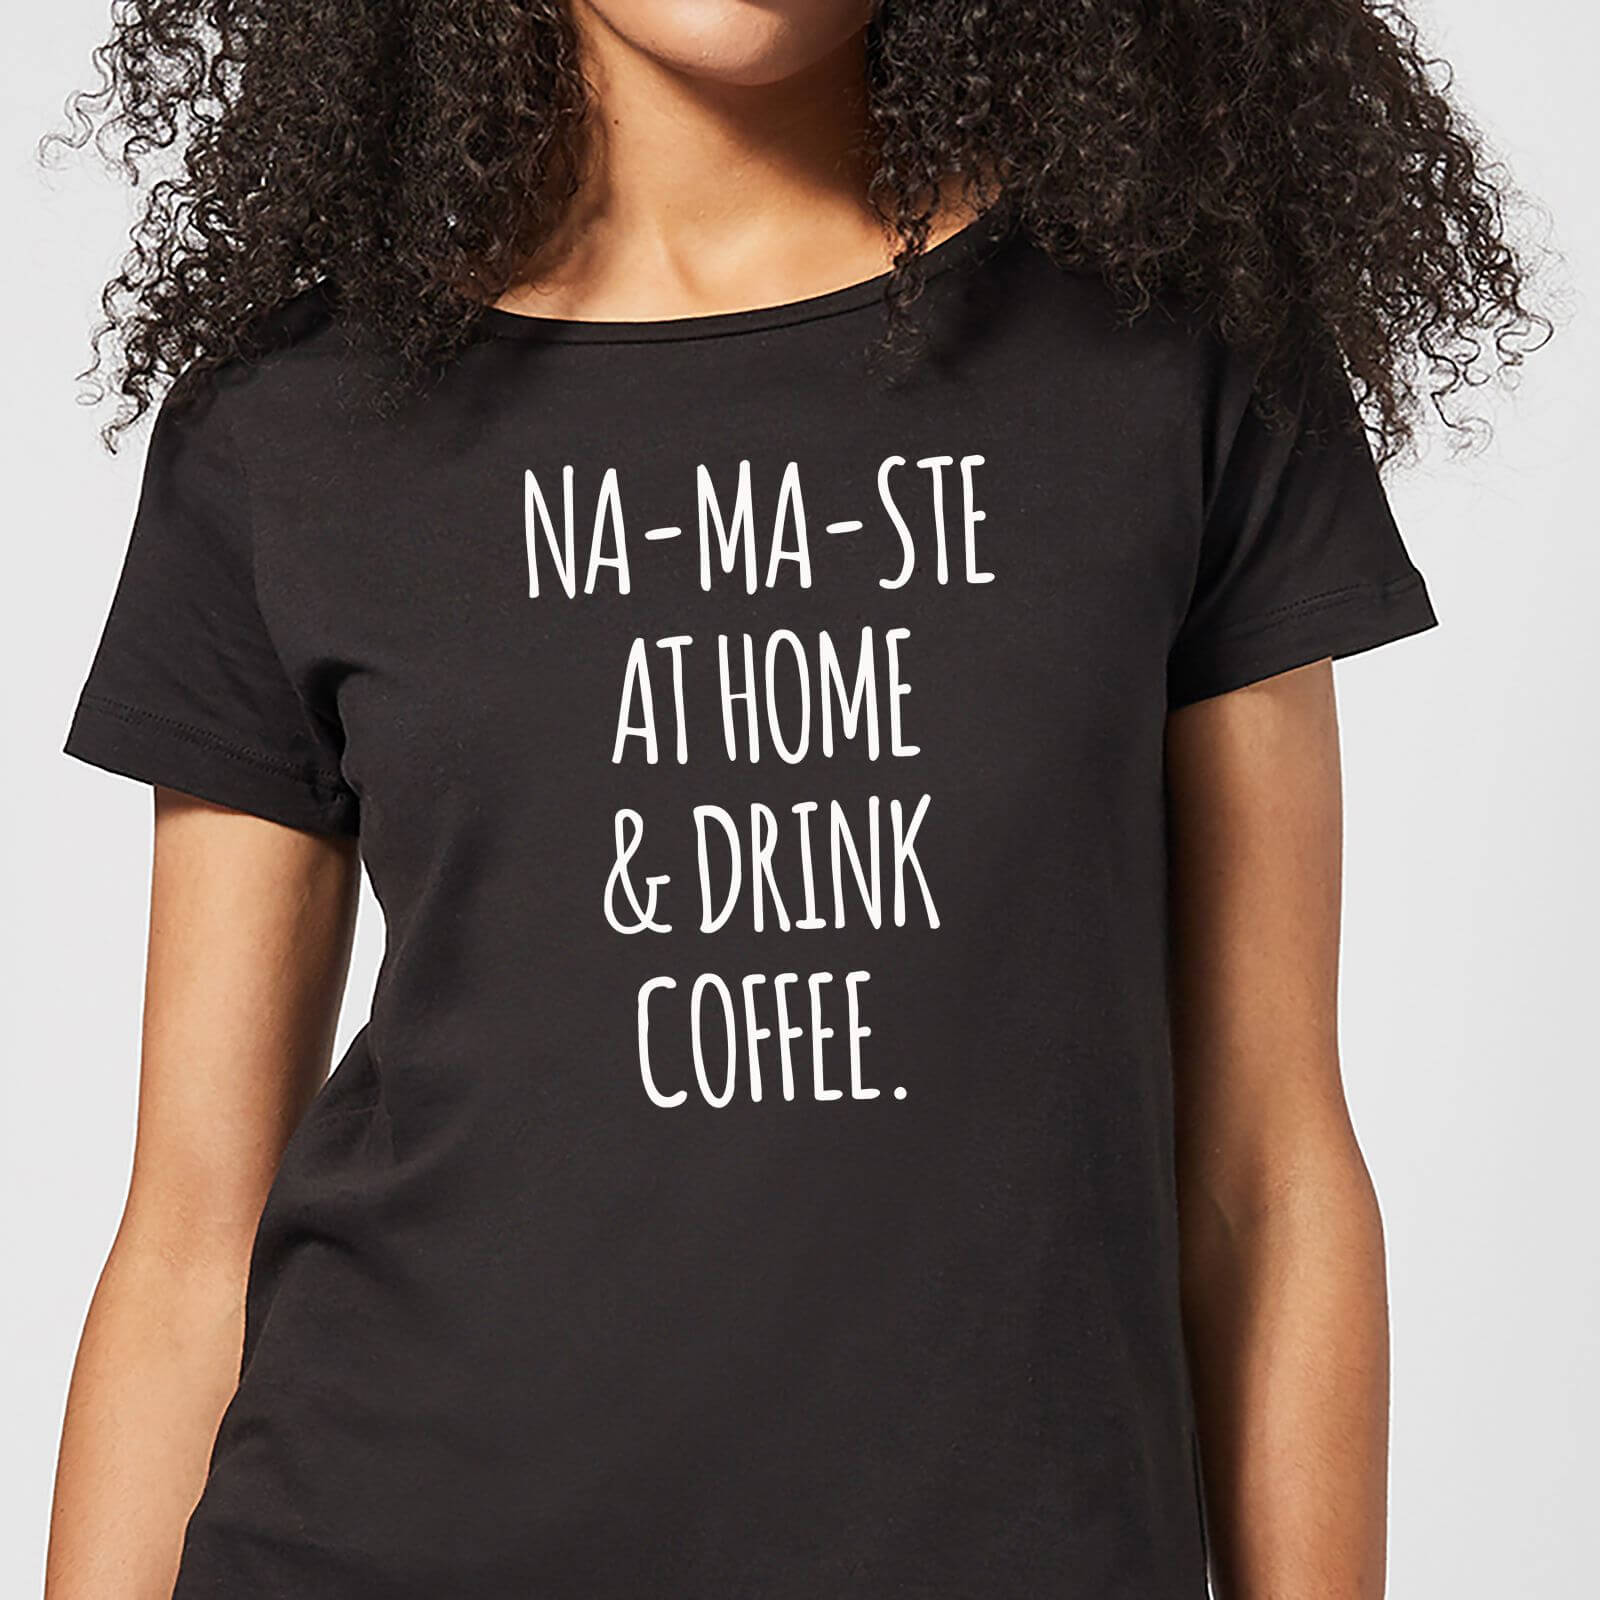 Na-ma-ste at Home and Drink Coffee Women's T-Shirt - Black - XXL - Black